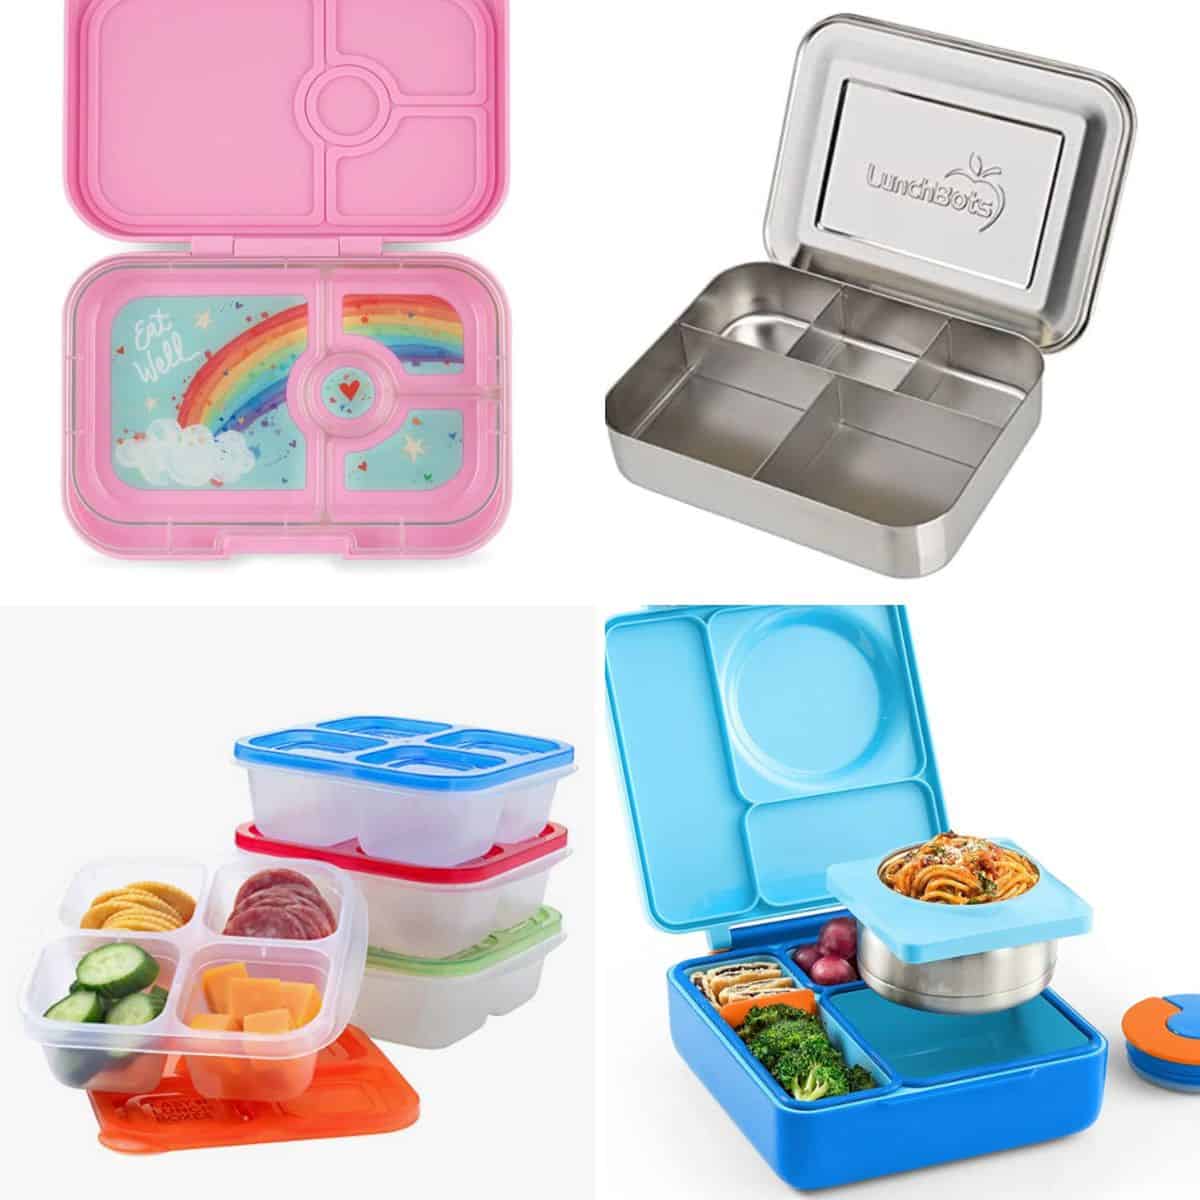 https://www.mjandhungryman.com/wp-content/uploads/2022/07/Best-lunch-boxes-for-kids.jpg